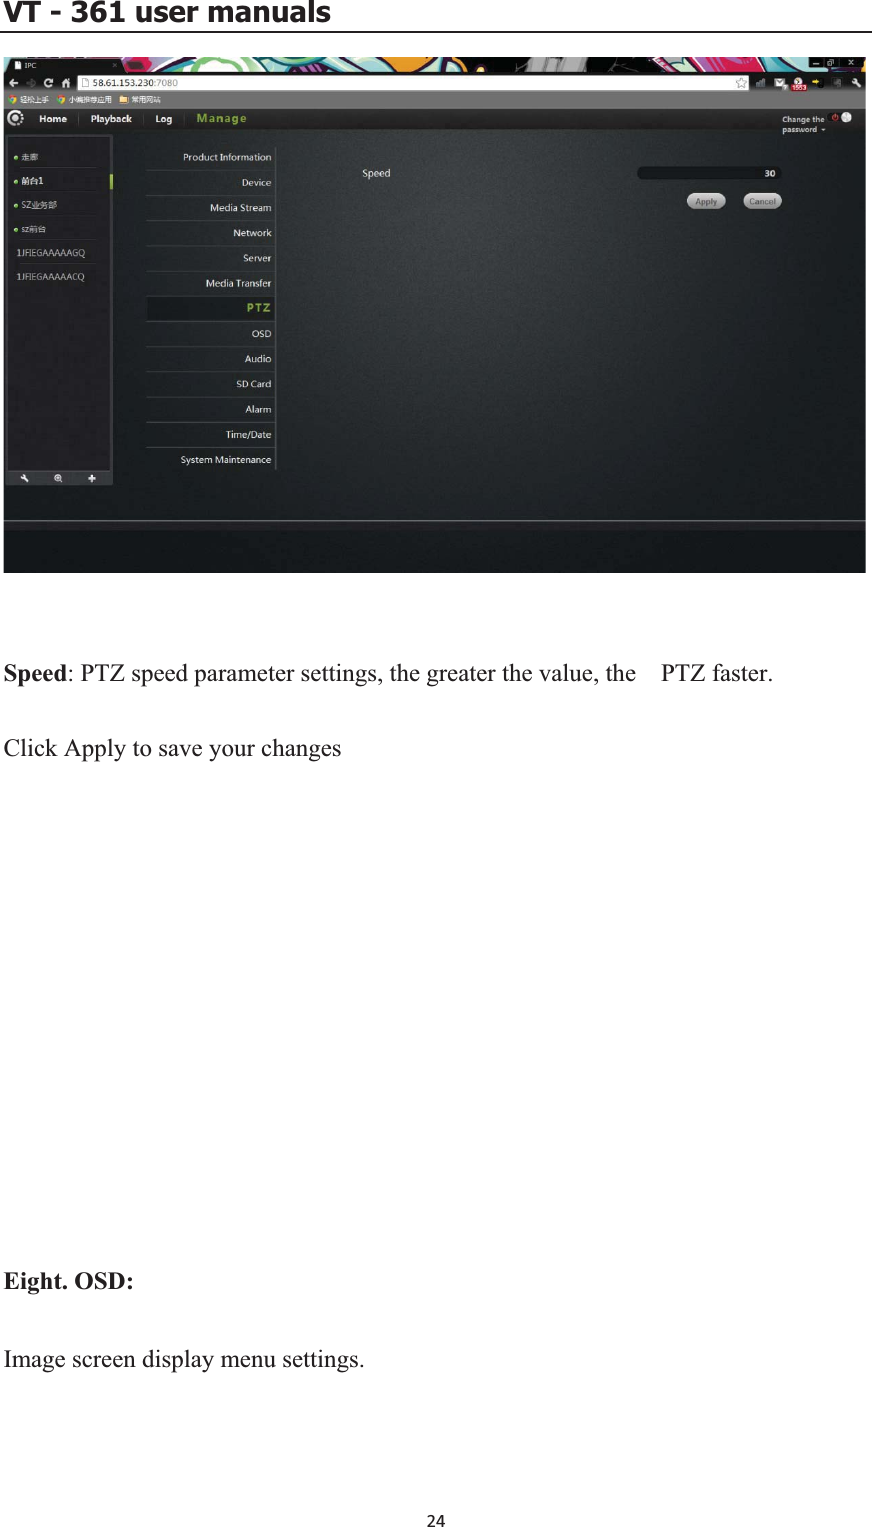 VT - 361 user manualsSpeed: PTZ speed parameter settings, the greater the value, the    PTZ faster. ight. OSD: Image screen display menu settings. Click Apply to save your changes     E24